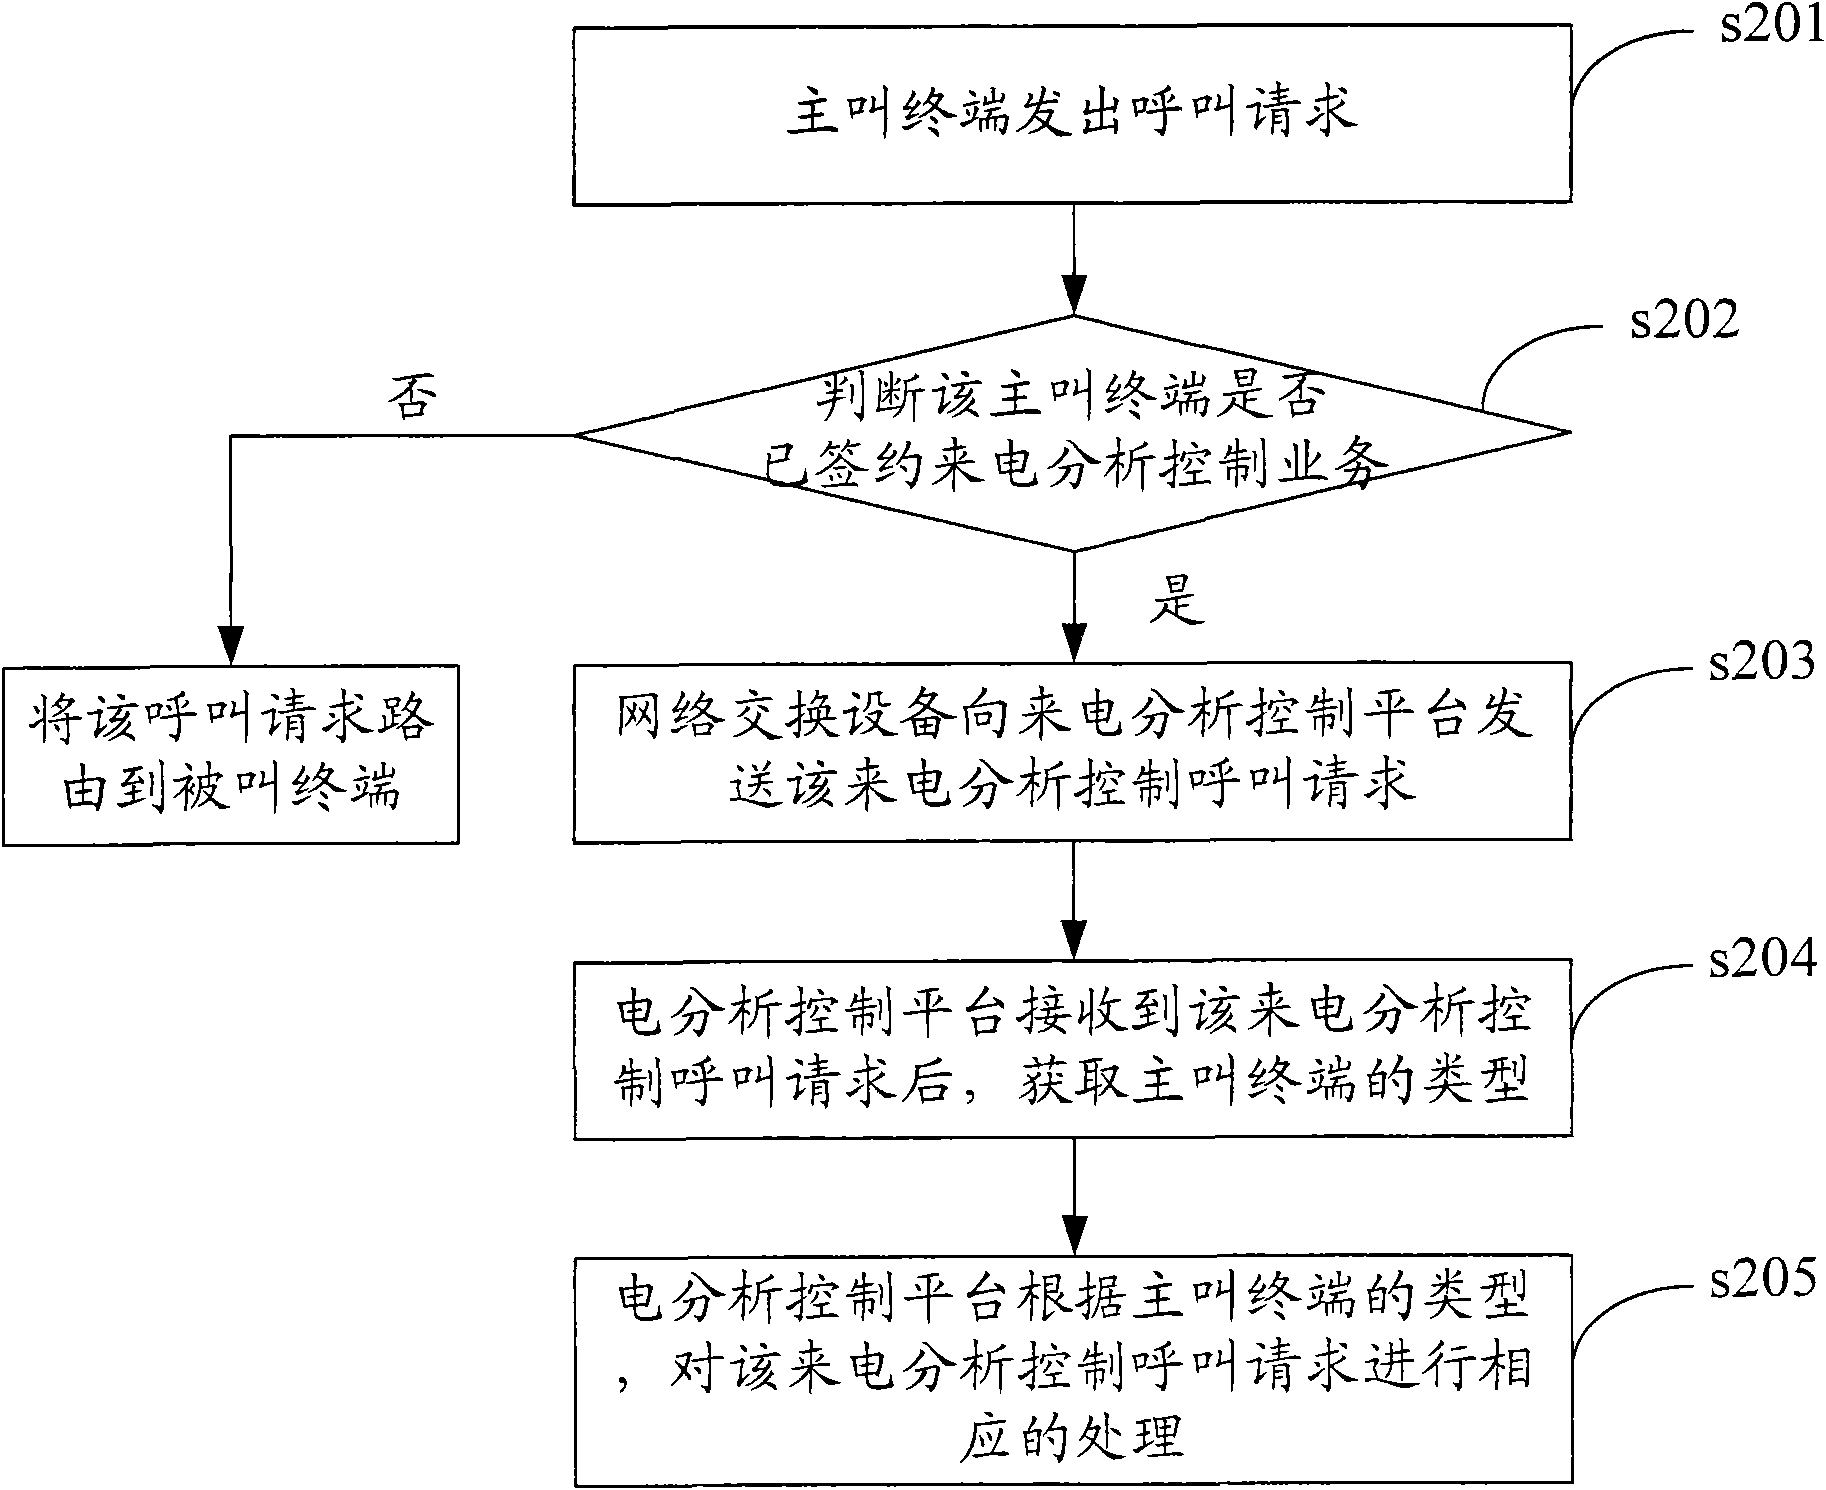 Method and device for incoming call analysis and control